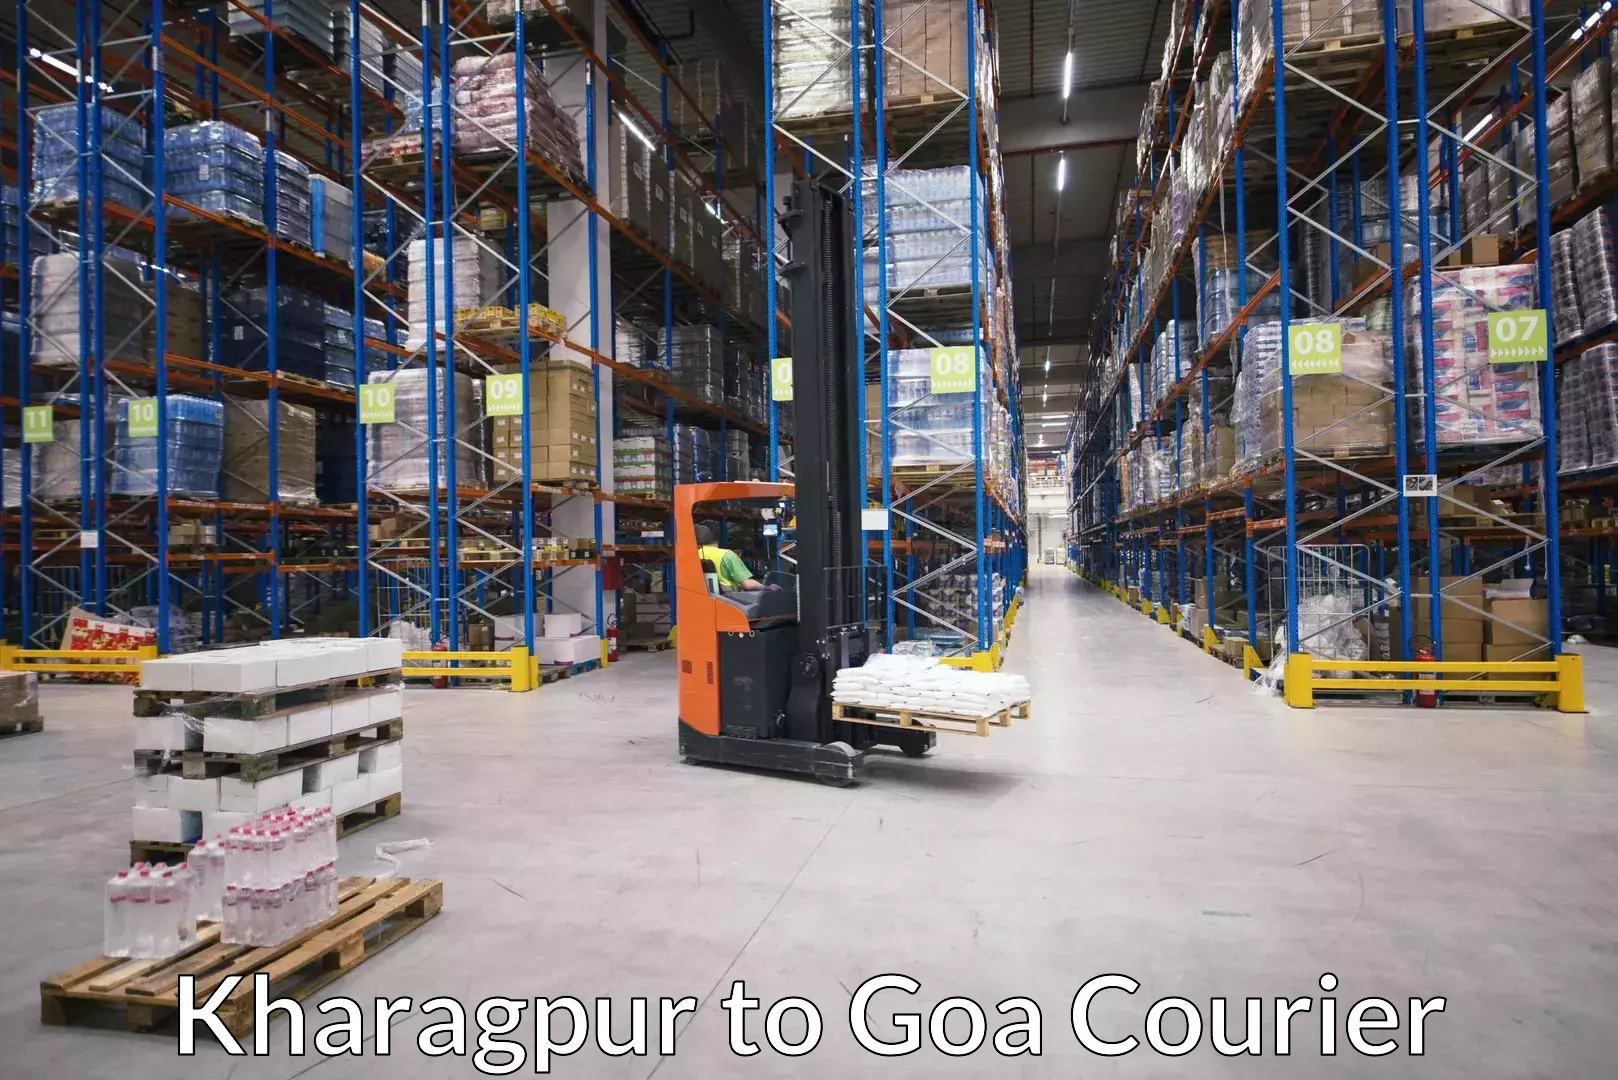 Luggage transport consultancy Kharagpur to Goa